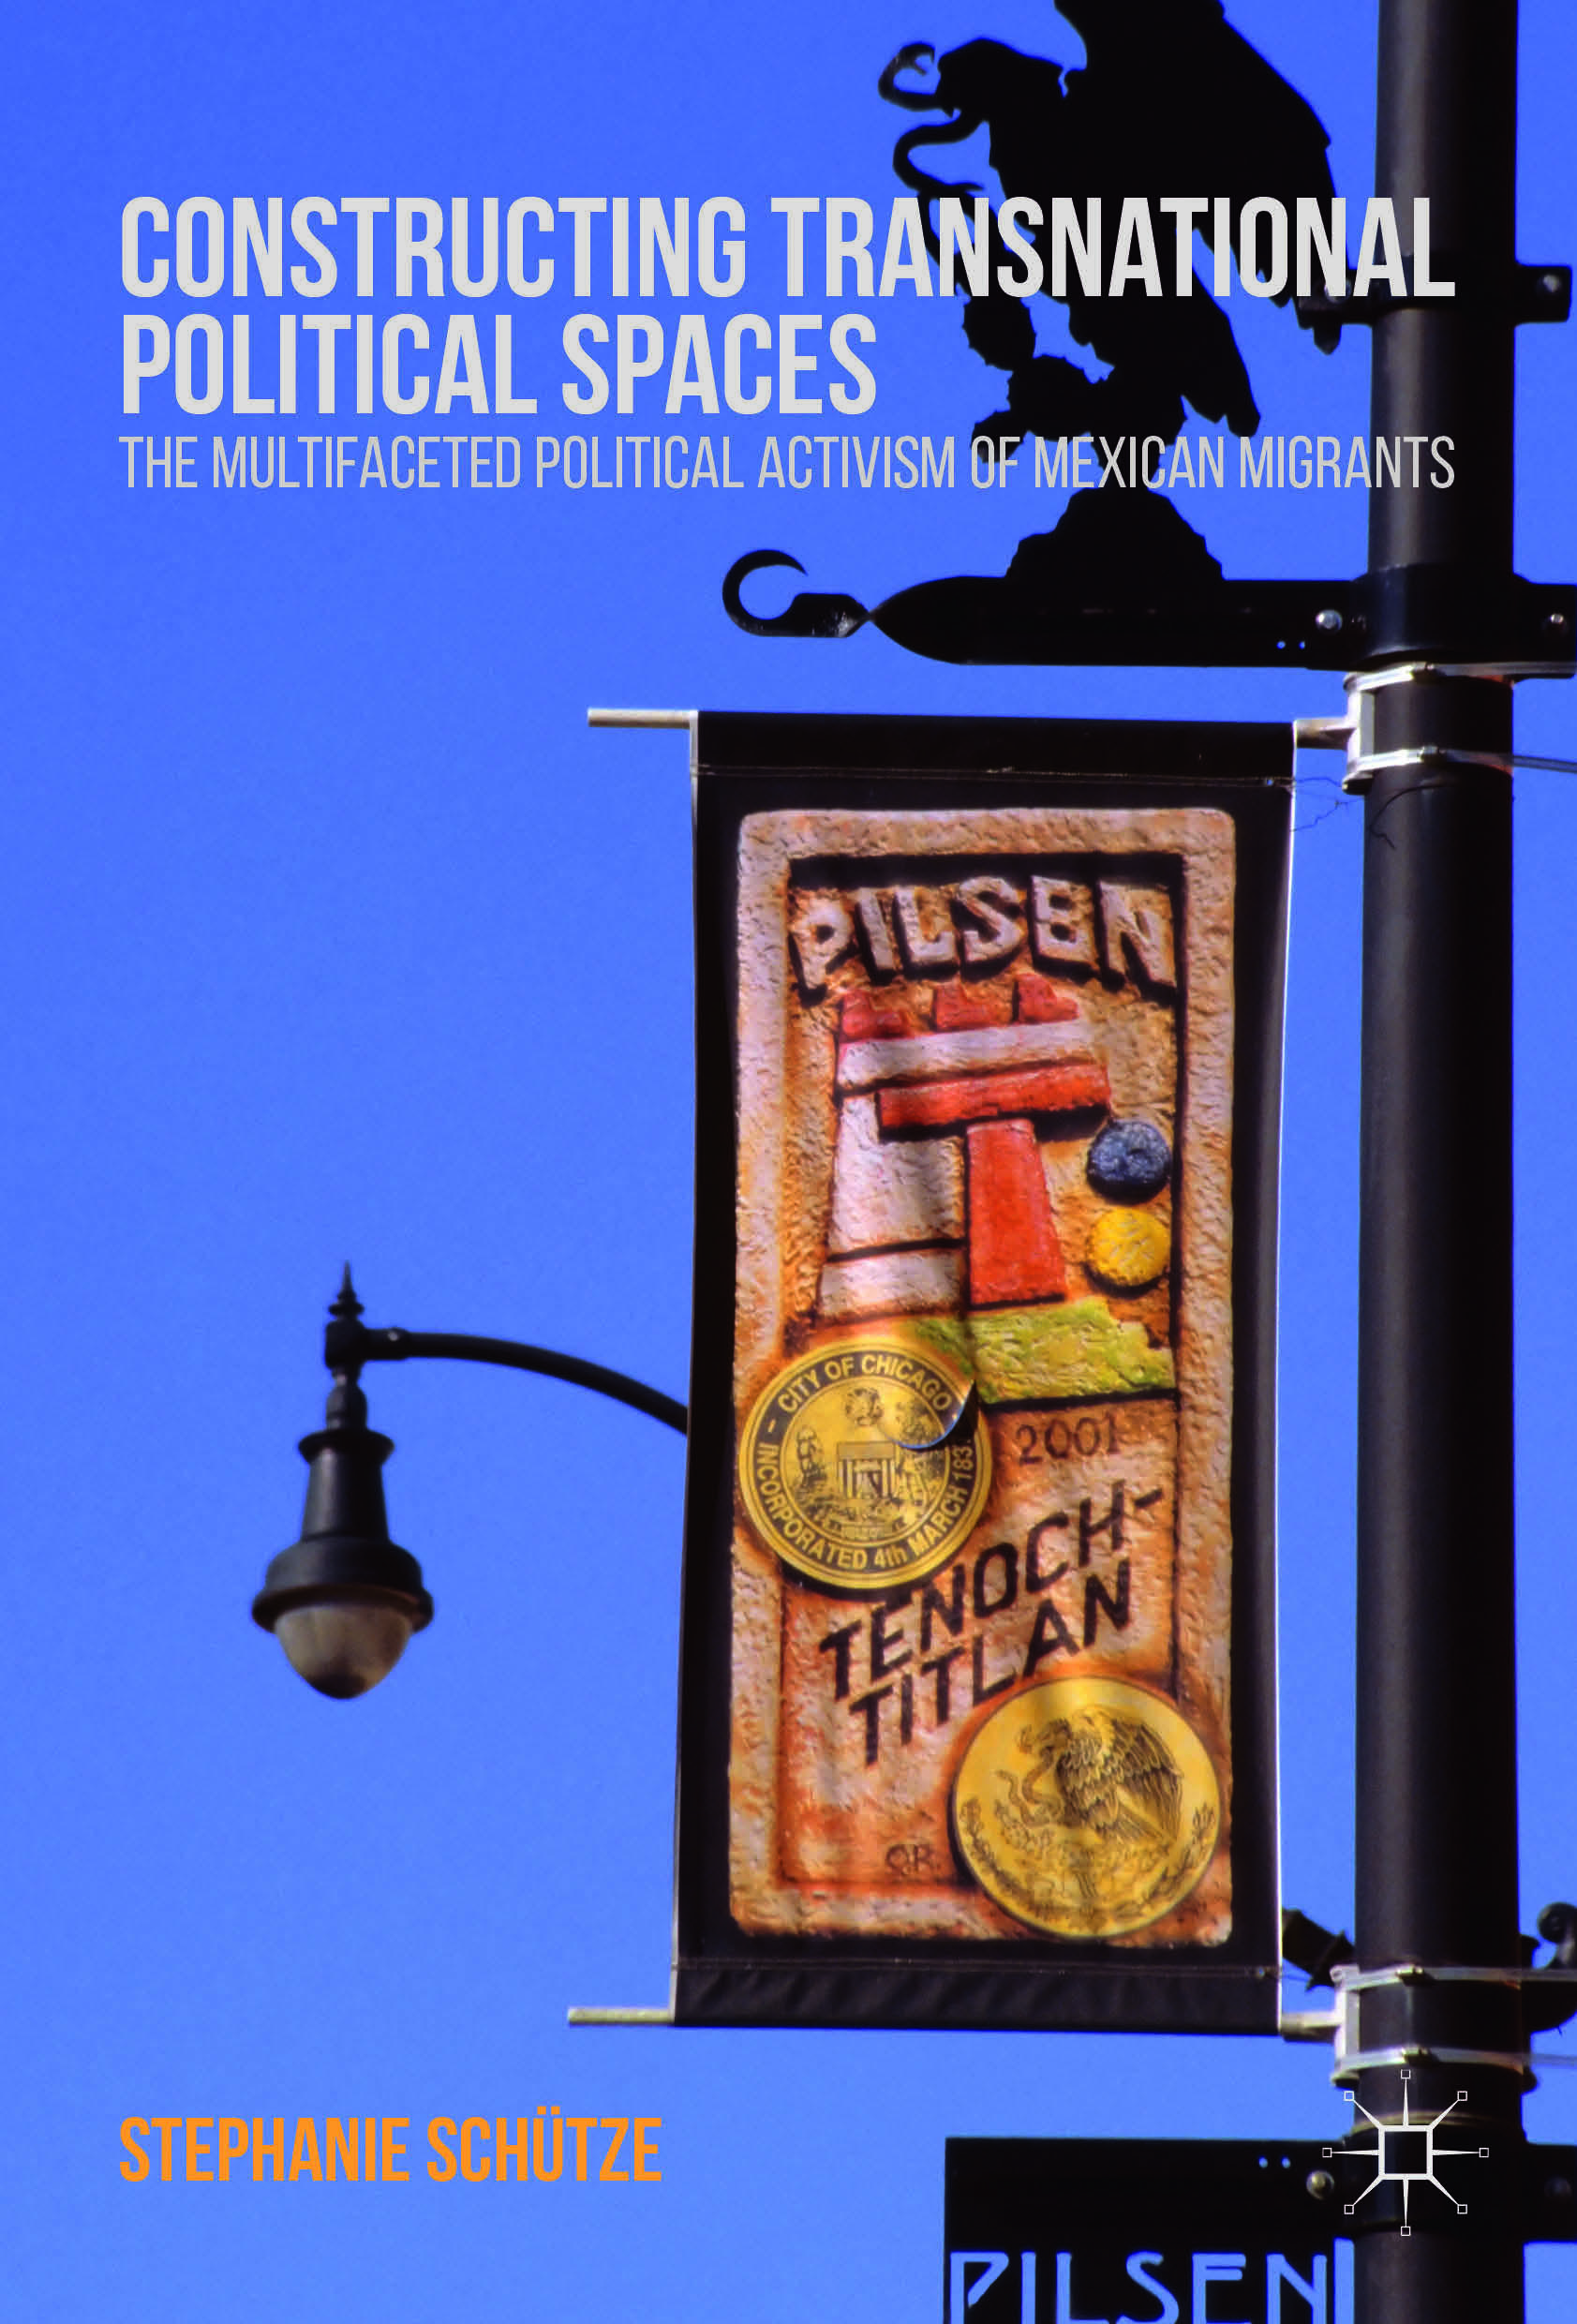 Buchcover_Constructing transnational political spaces